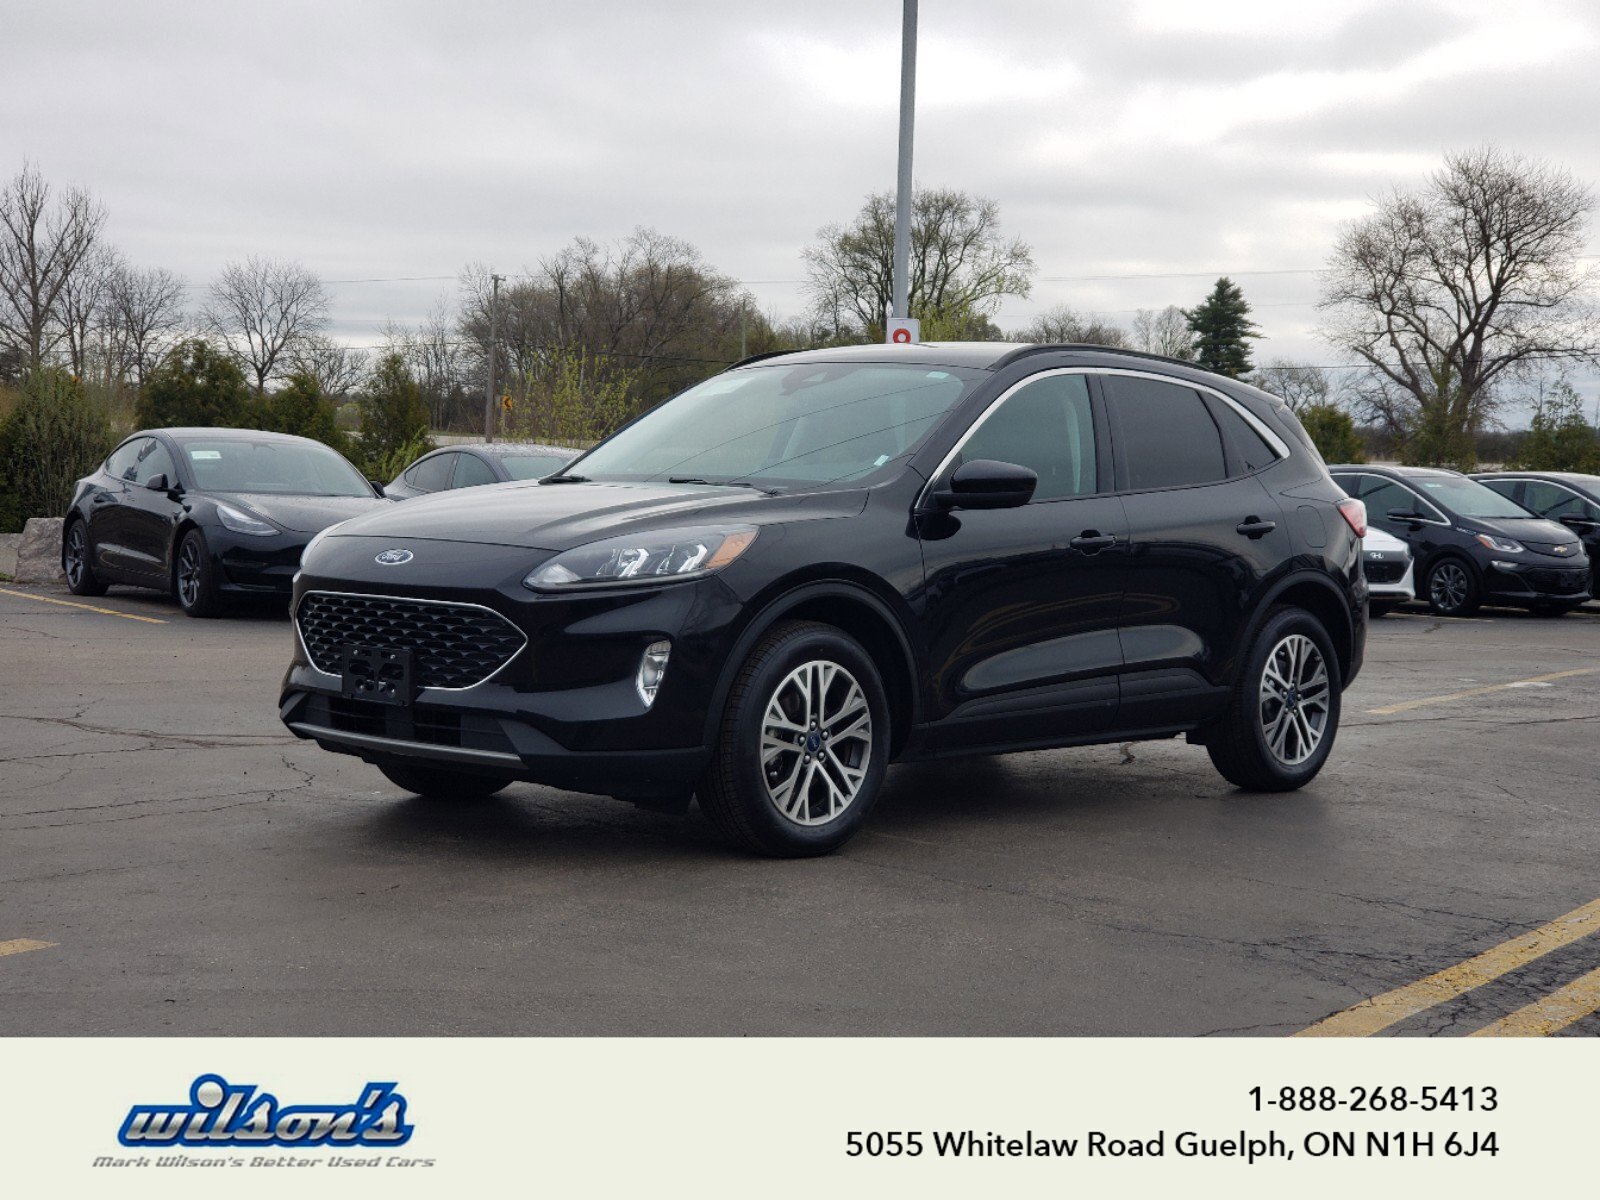 2021 Ford Escape SEL AWD, Leather, Heated Seats, CarPlay + Android,